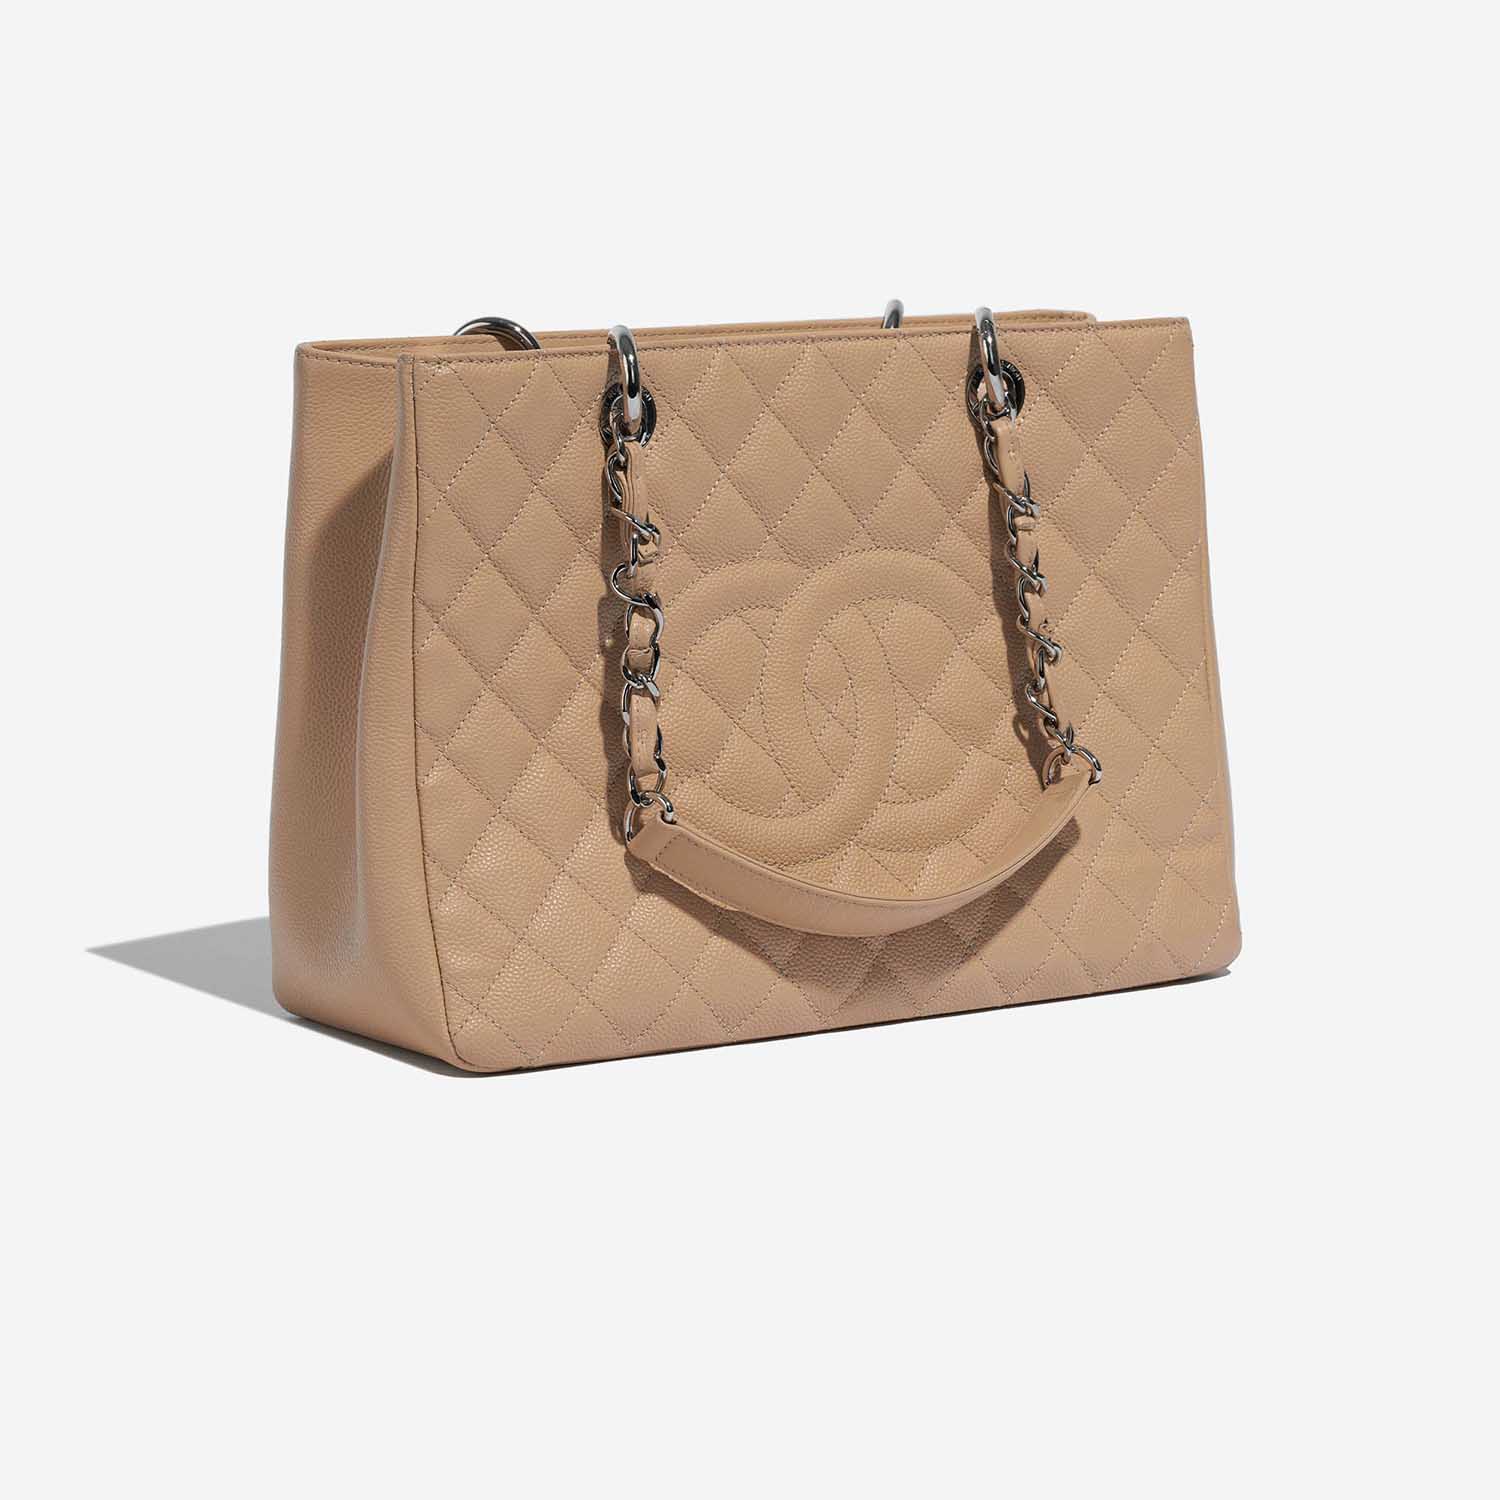 Pre-owned Chanel bag Shopping Tote GST Caviar Beige Beige Side Front | Sell your designer bag on Saclab.com